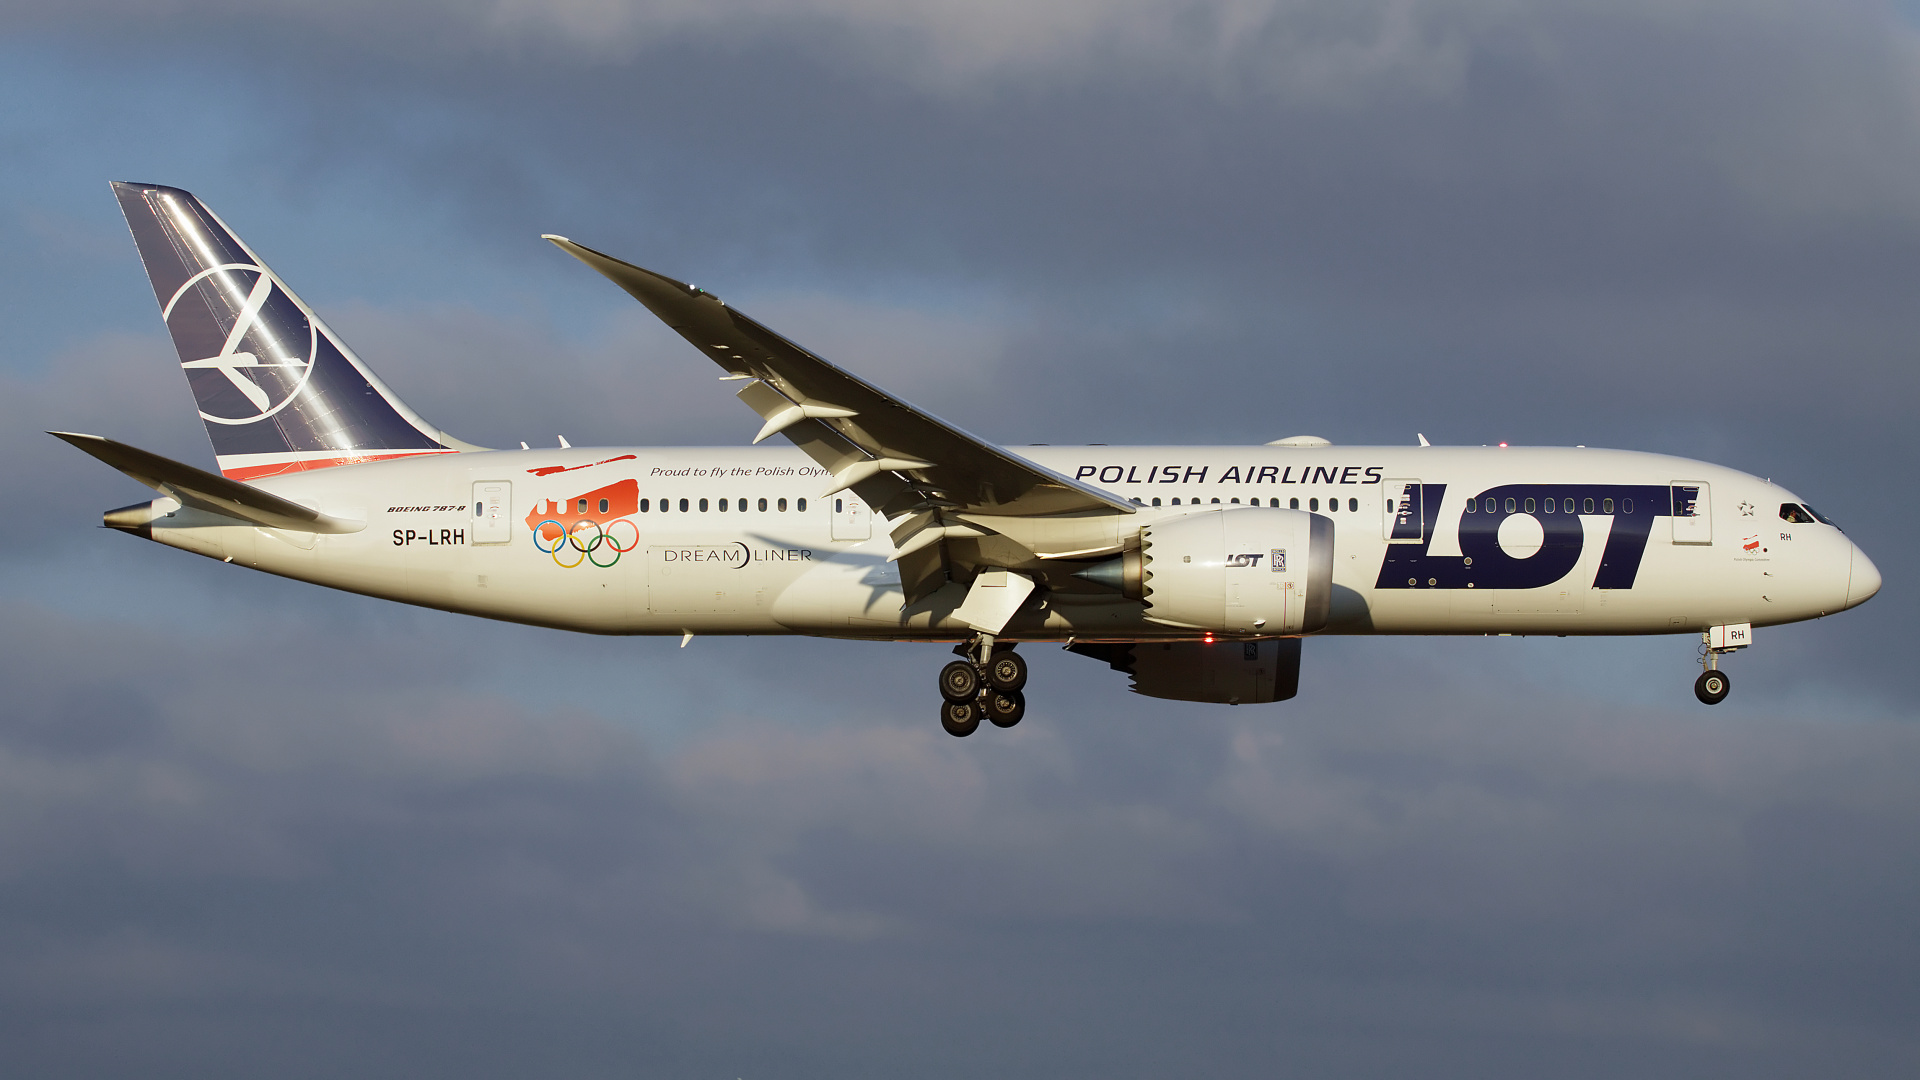 SP-LRH (Proud to fly the Polish Olympic Team livery) (Aircraft » EPWA Spotting » Boeing 787-8 Dreamliner » LOT Polish Airlines)